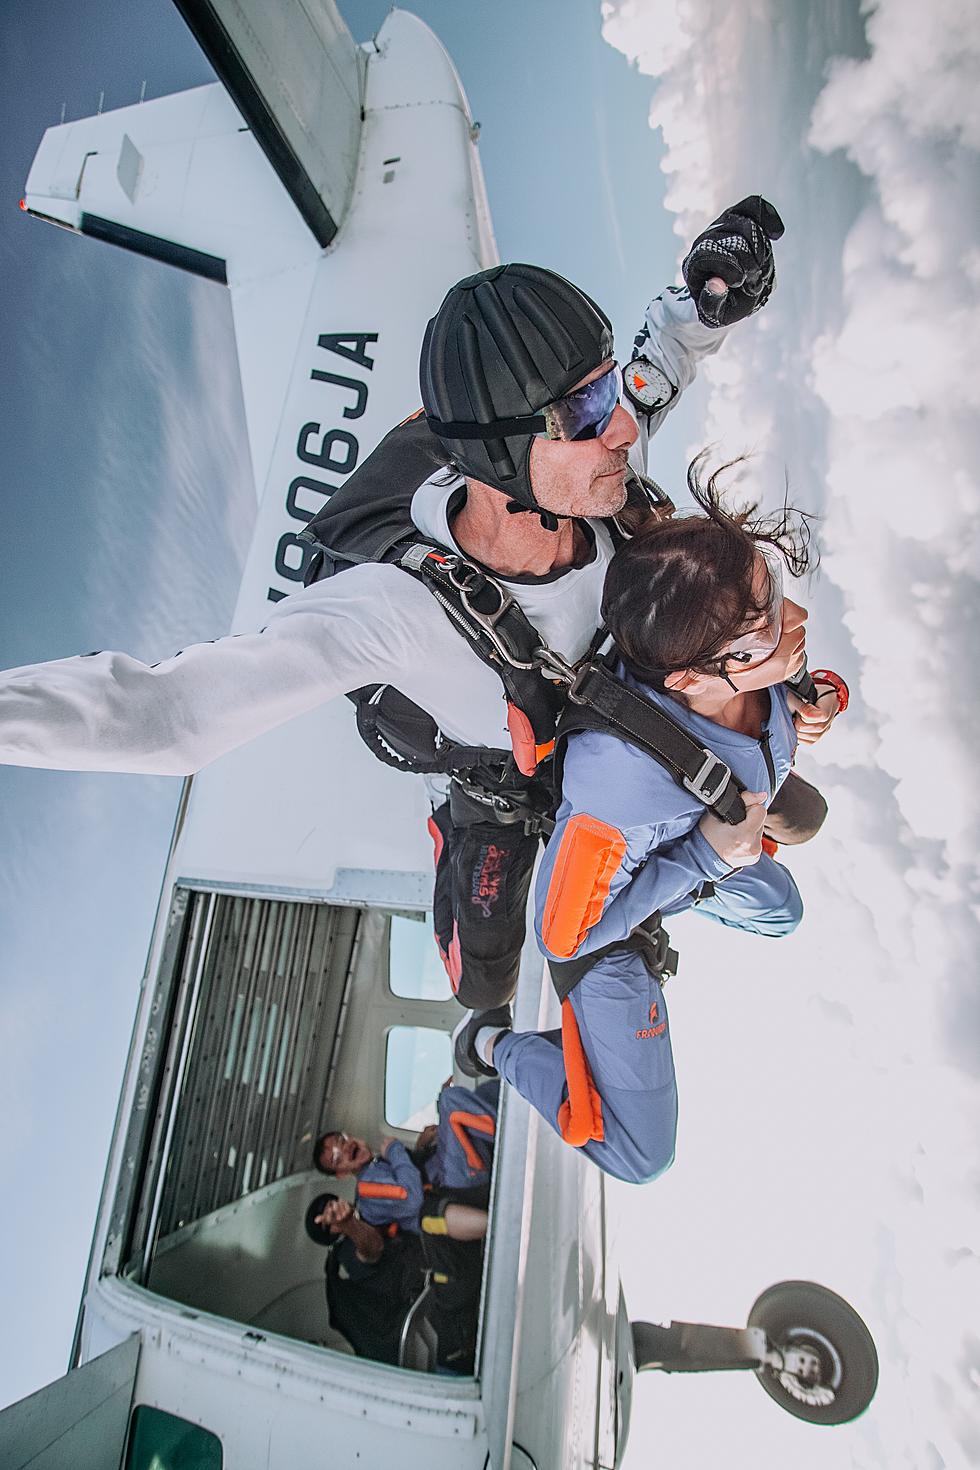 Beat the Heat? Skydive Naked From an Airplane, Set a World Record